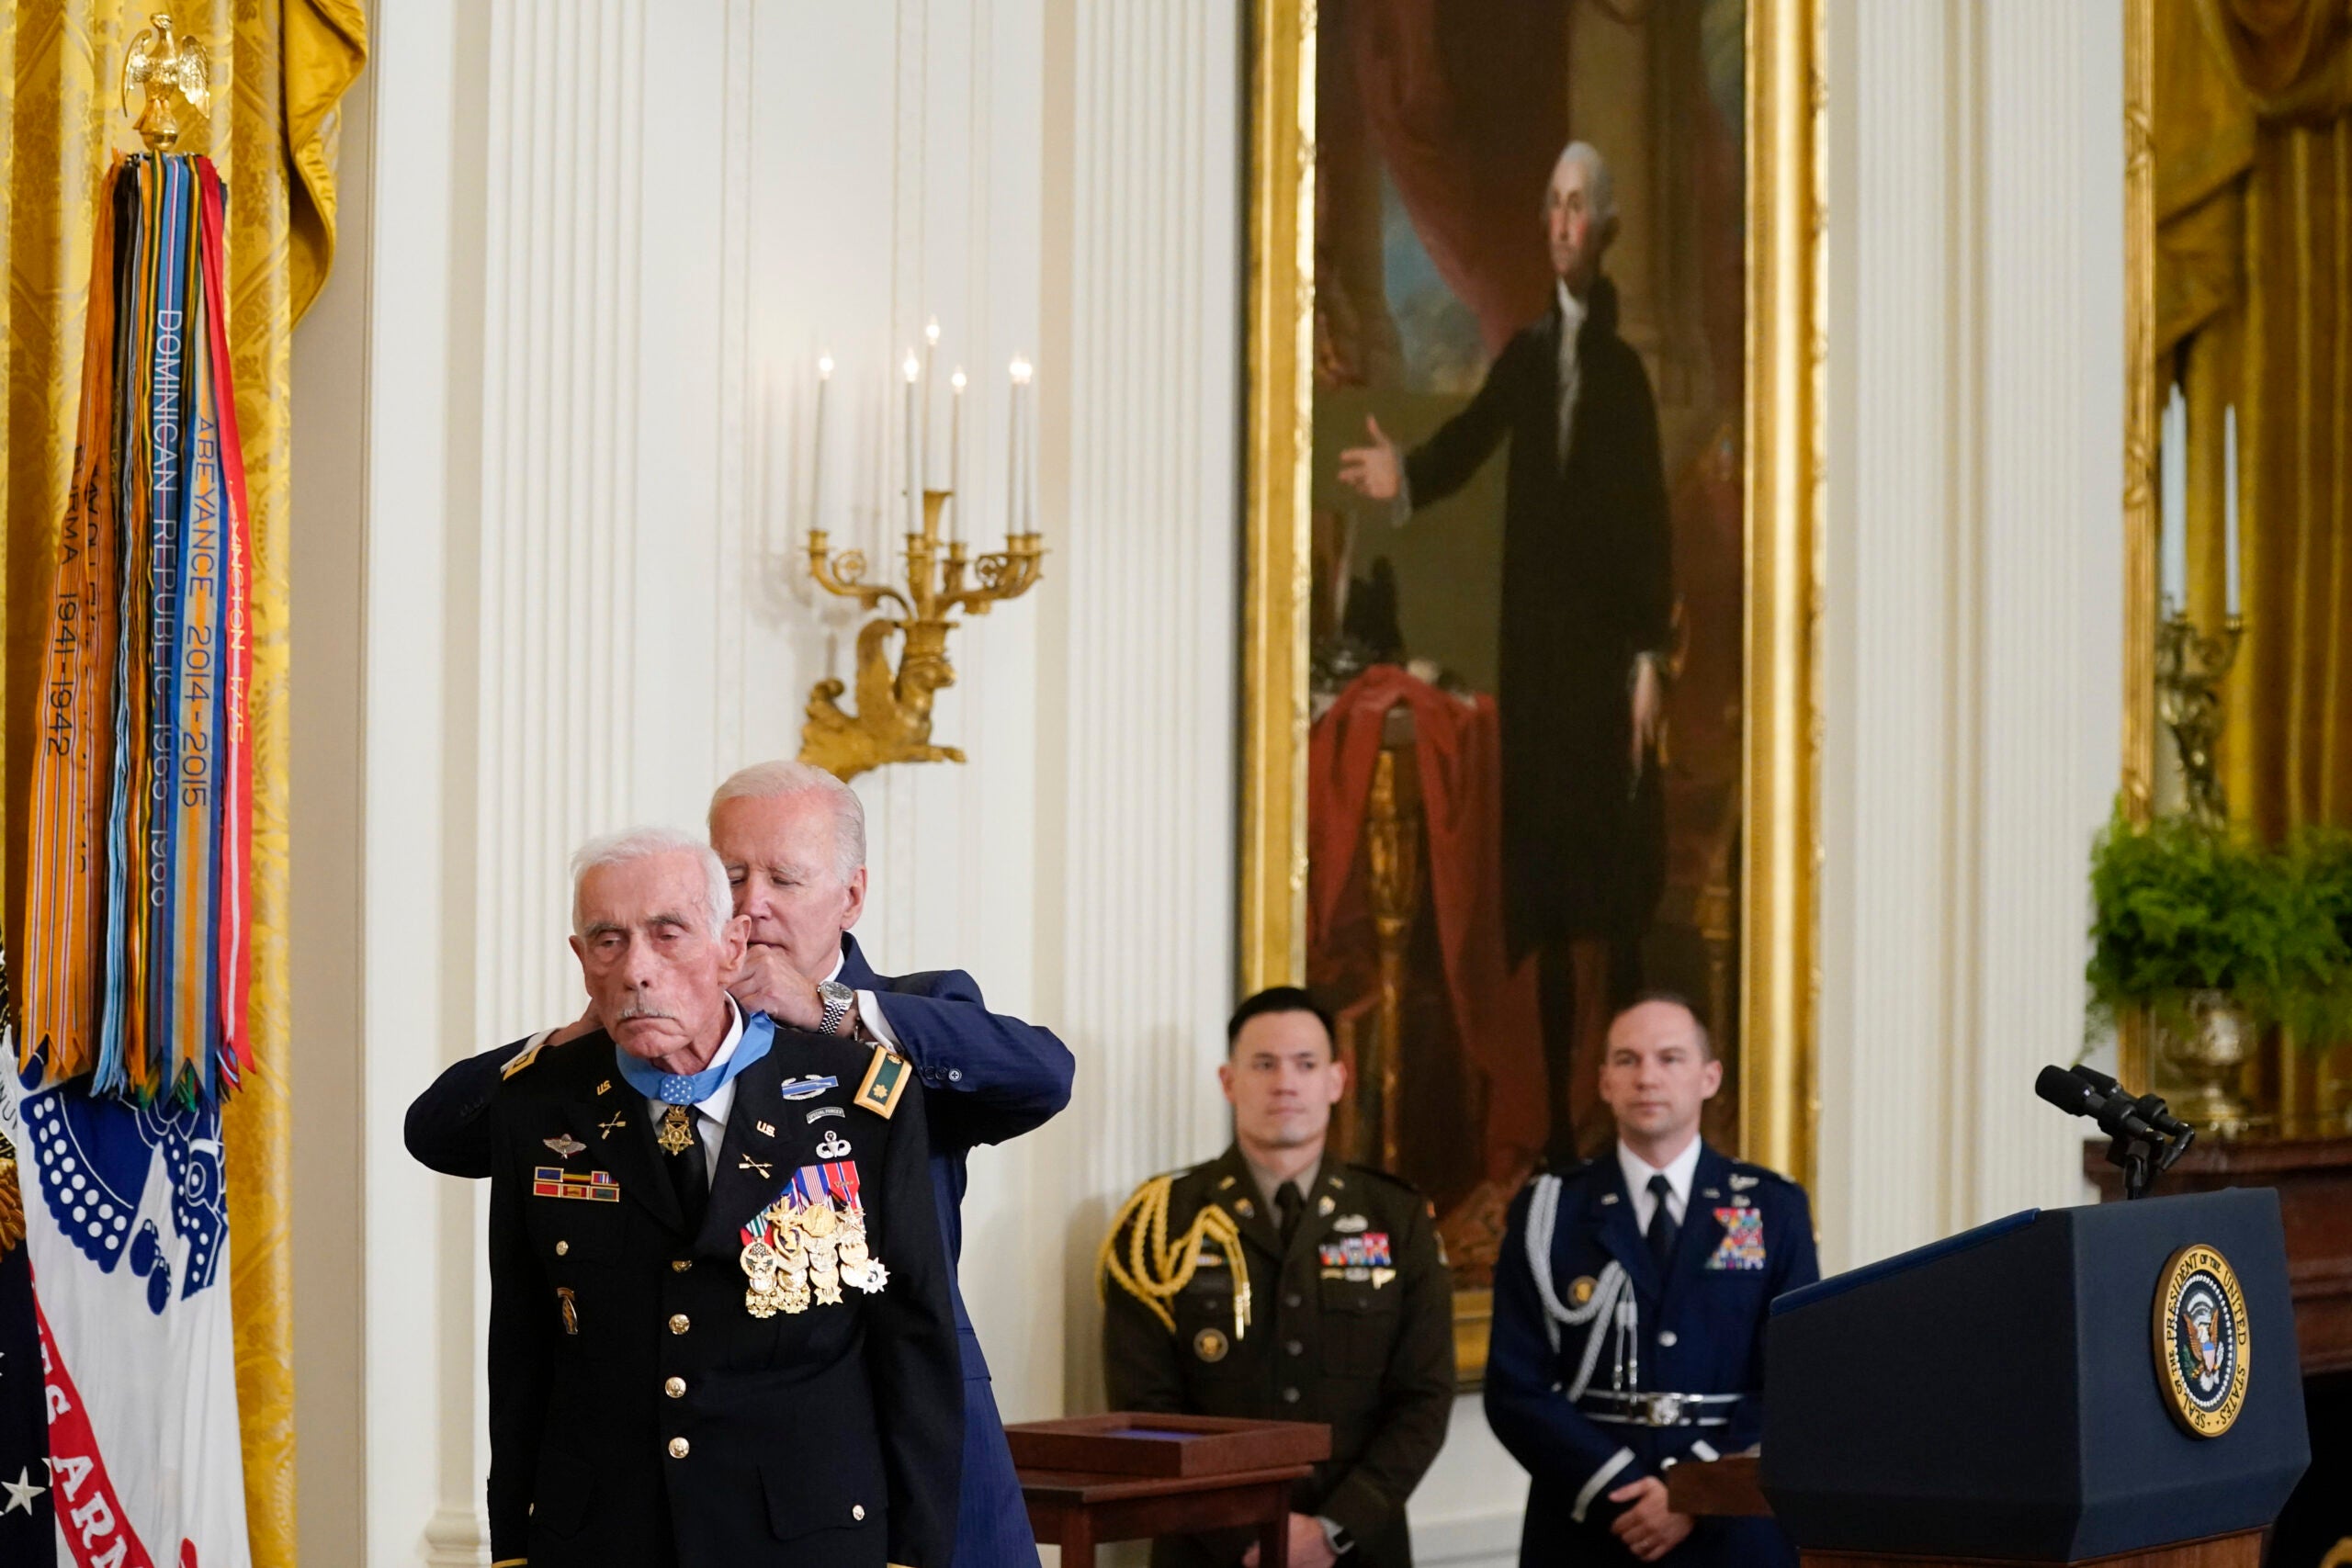 President Joe Biden awards the Medal of Honor to retired Maj. John Duffy for his actions on April 14-15 1972, during the Vietnam War, during a ceremony in the East Room of the White House, Tuesday, July 5, 2022, in Washington. (AP Photo/Evan Vucci)